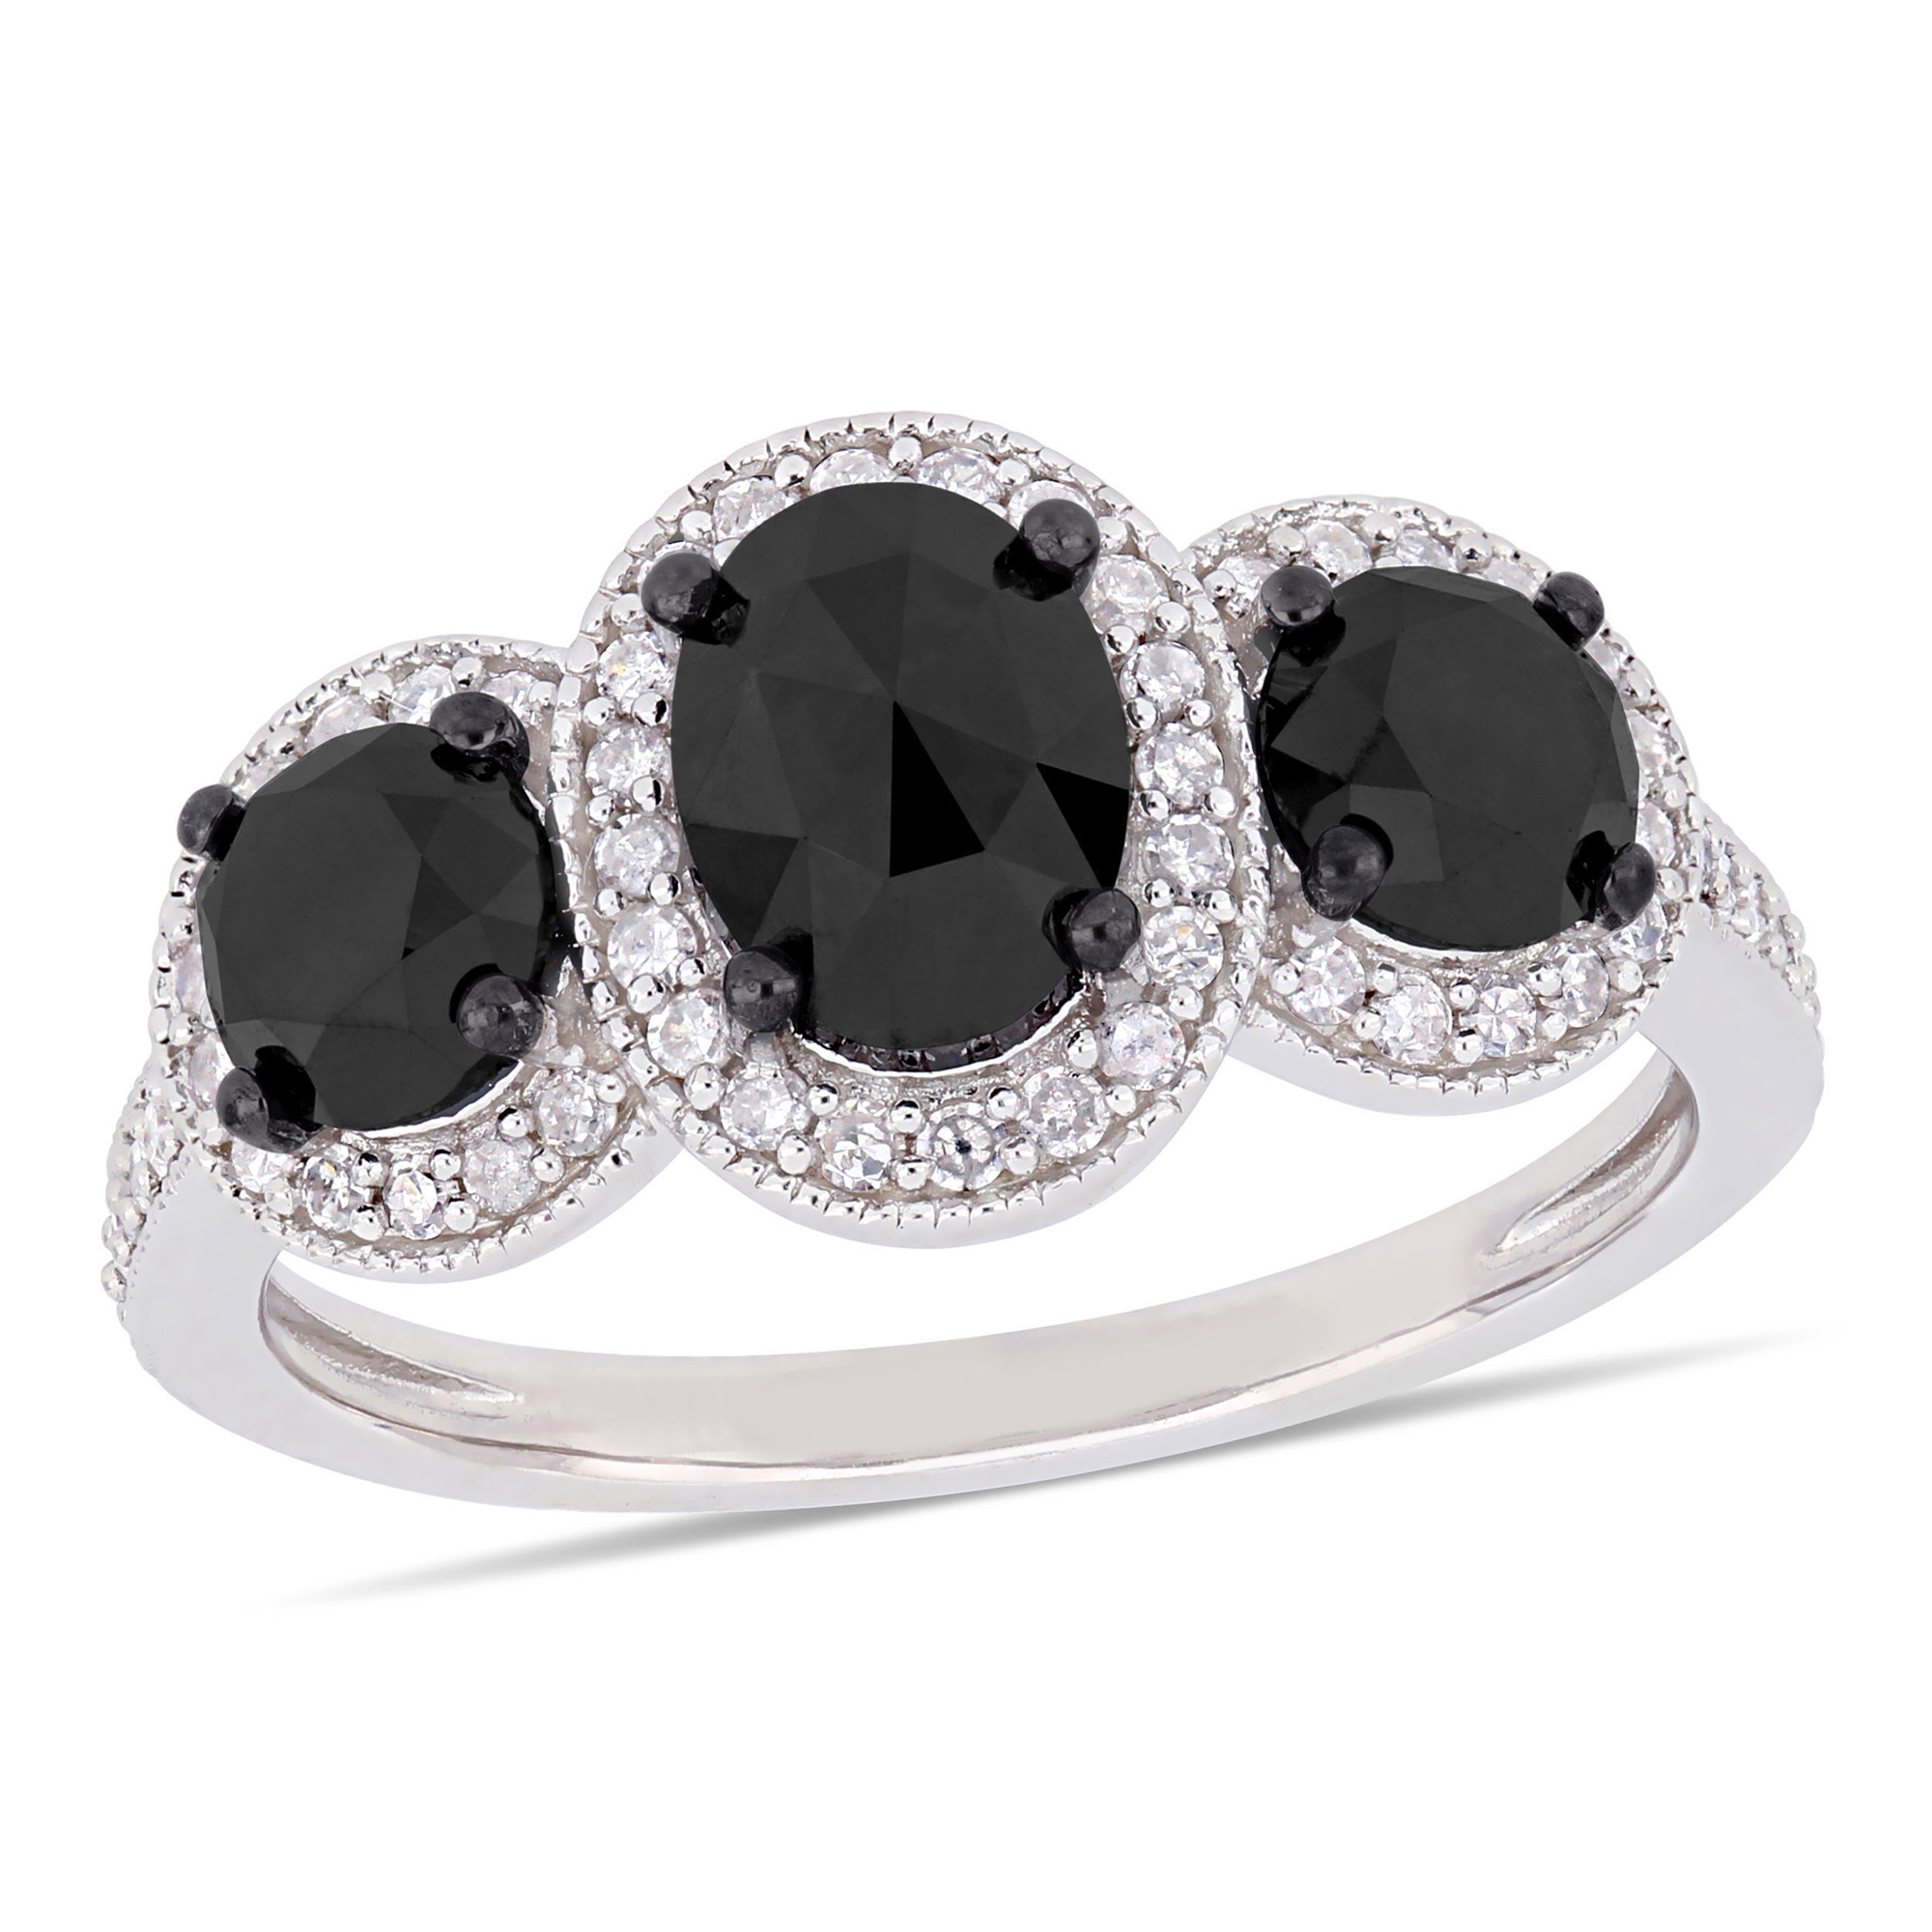 2 1/4ctw Treated Black Diamond and Diamond Sterling Silver Three-Stone Halo Engagement Ring - Size 8 -  REEDS, RDJ004778-800